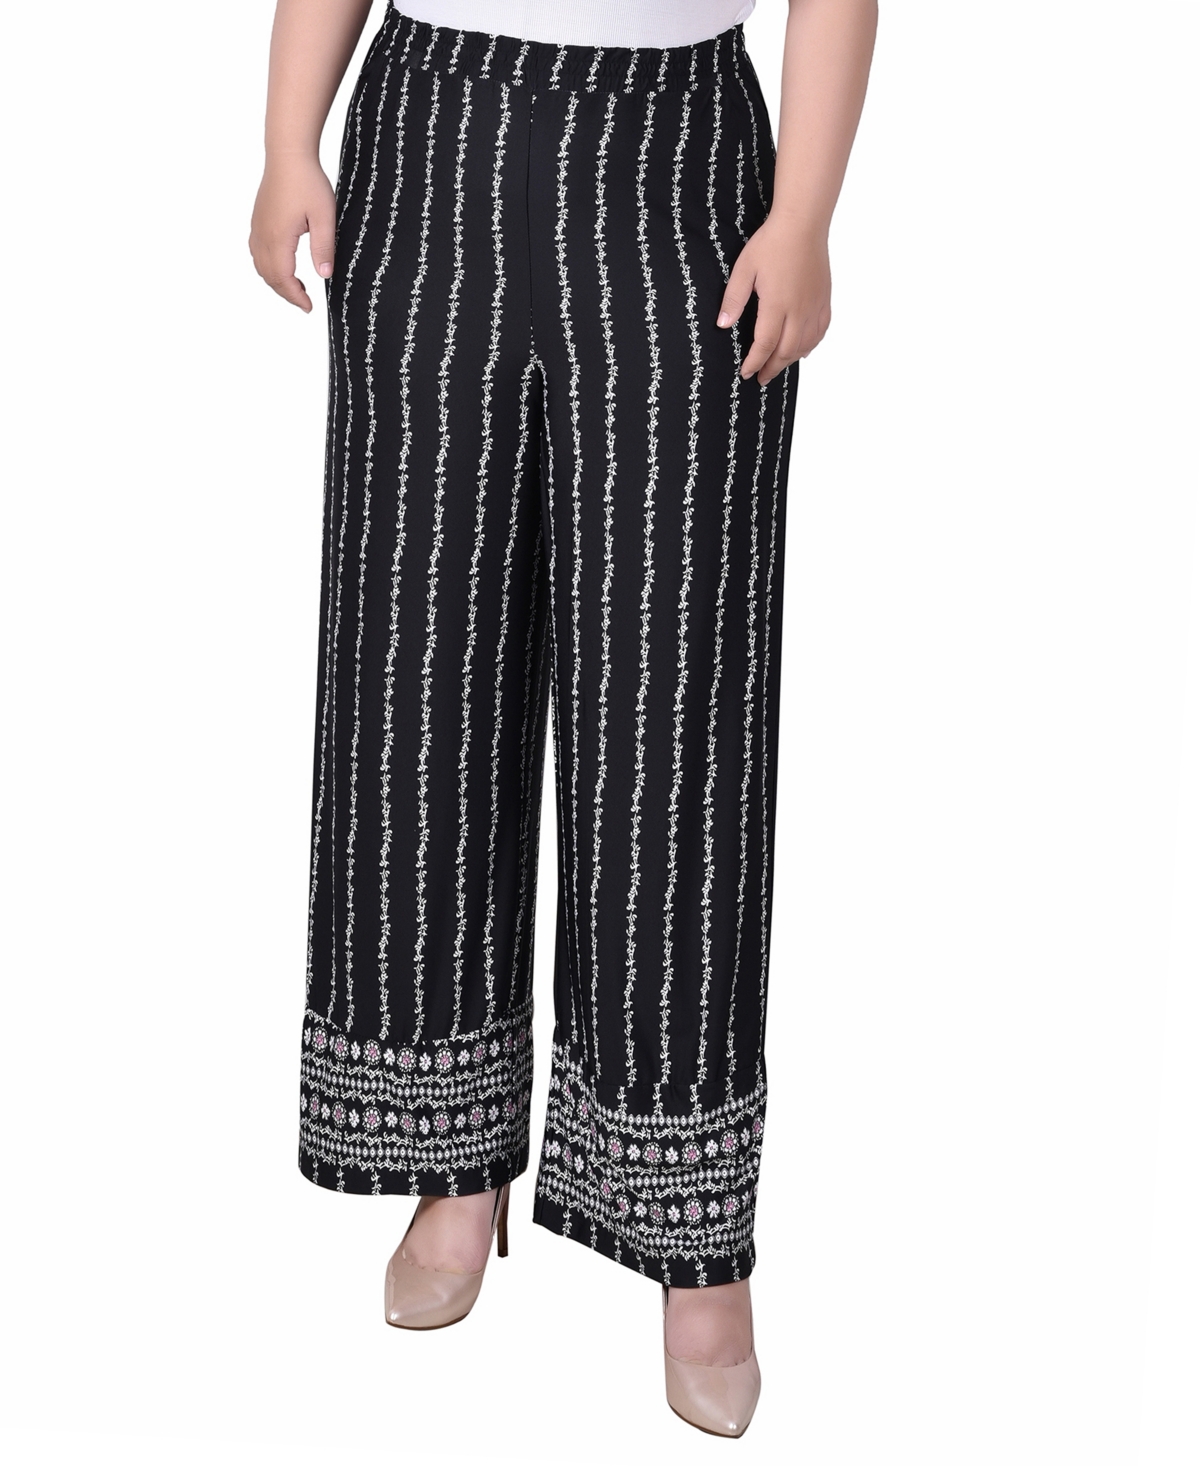 NY COLLECTION PLUS SIZE WIDE LEG PULL ON PANTS